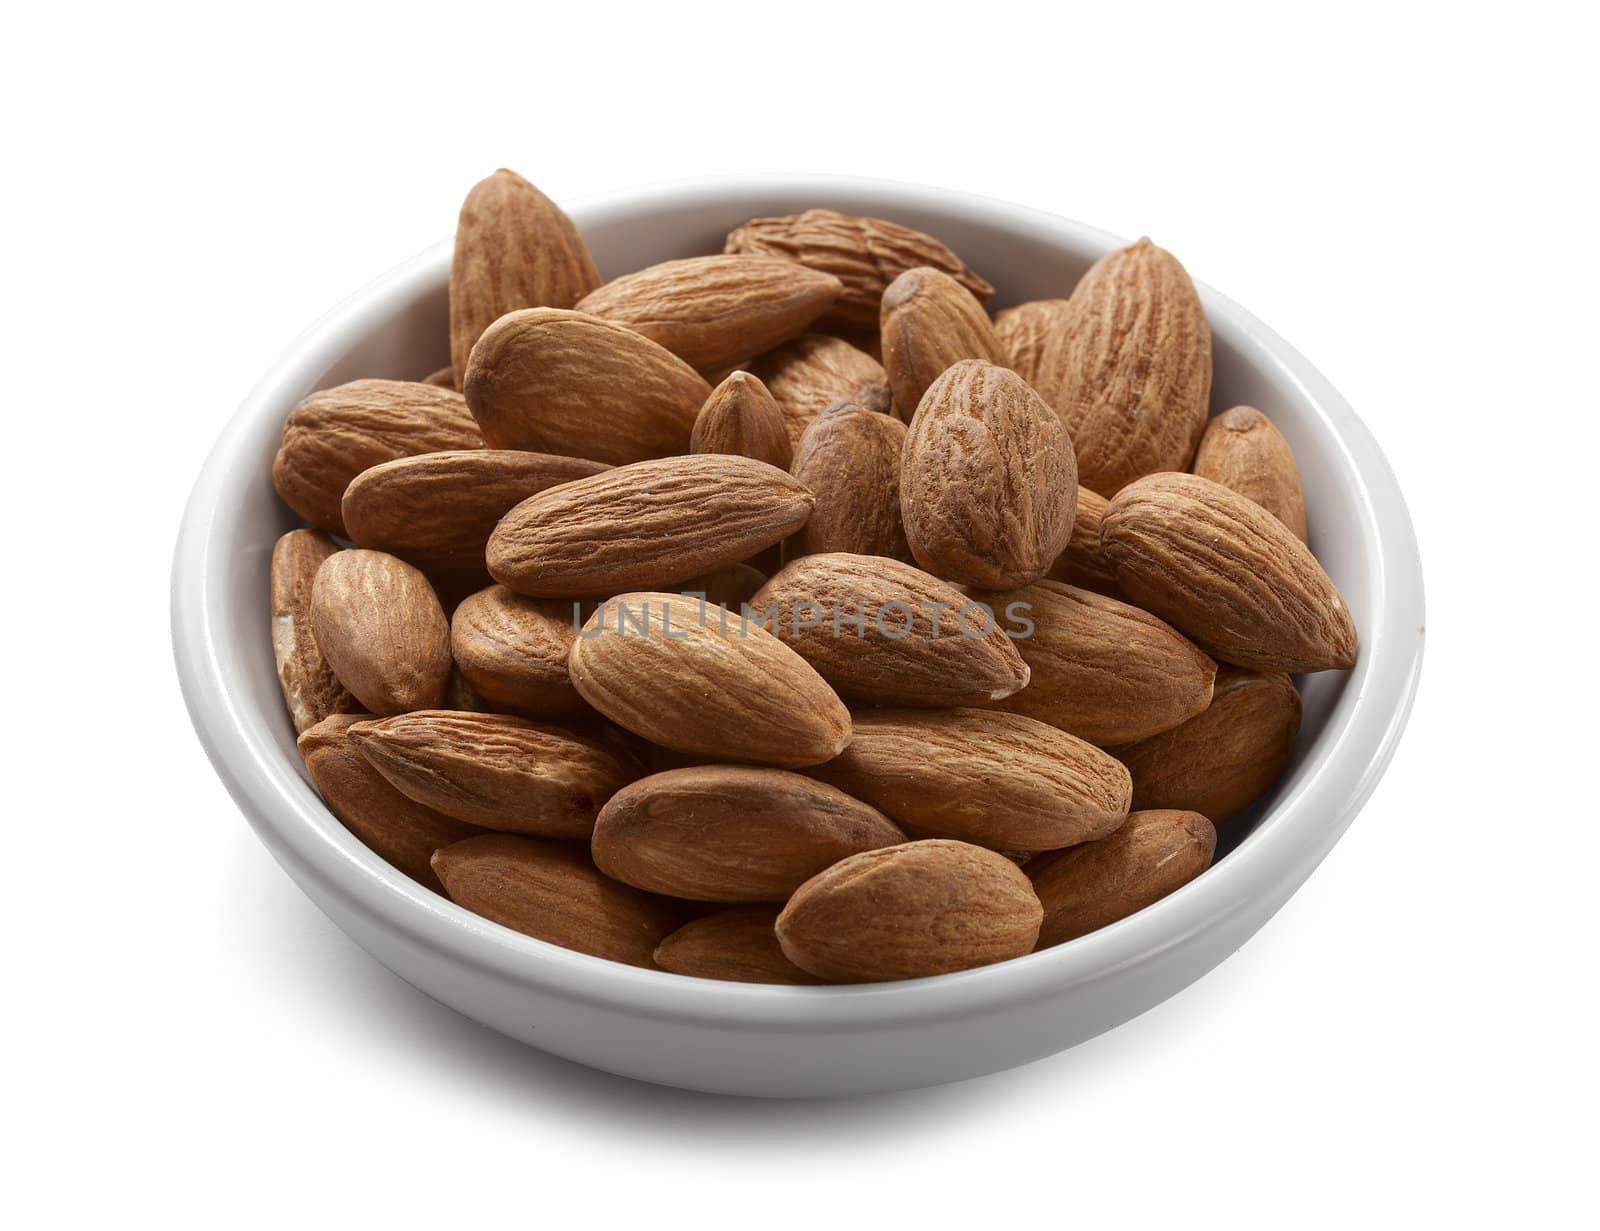 Handful of almonds on the white plate